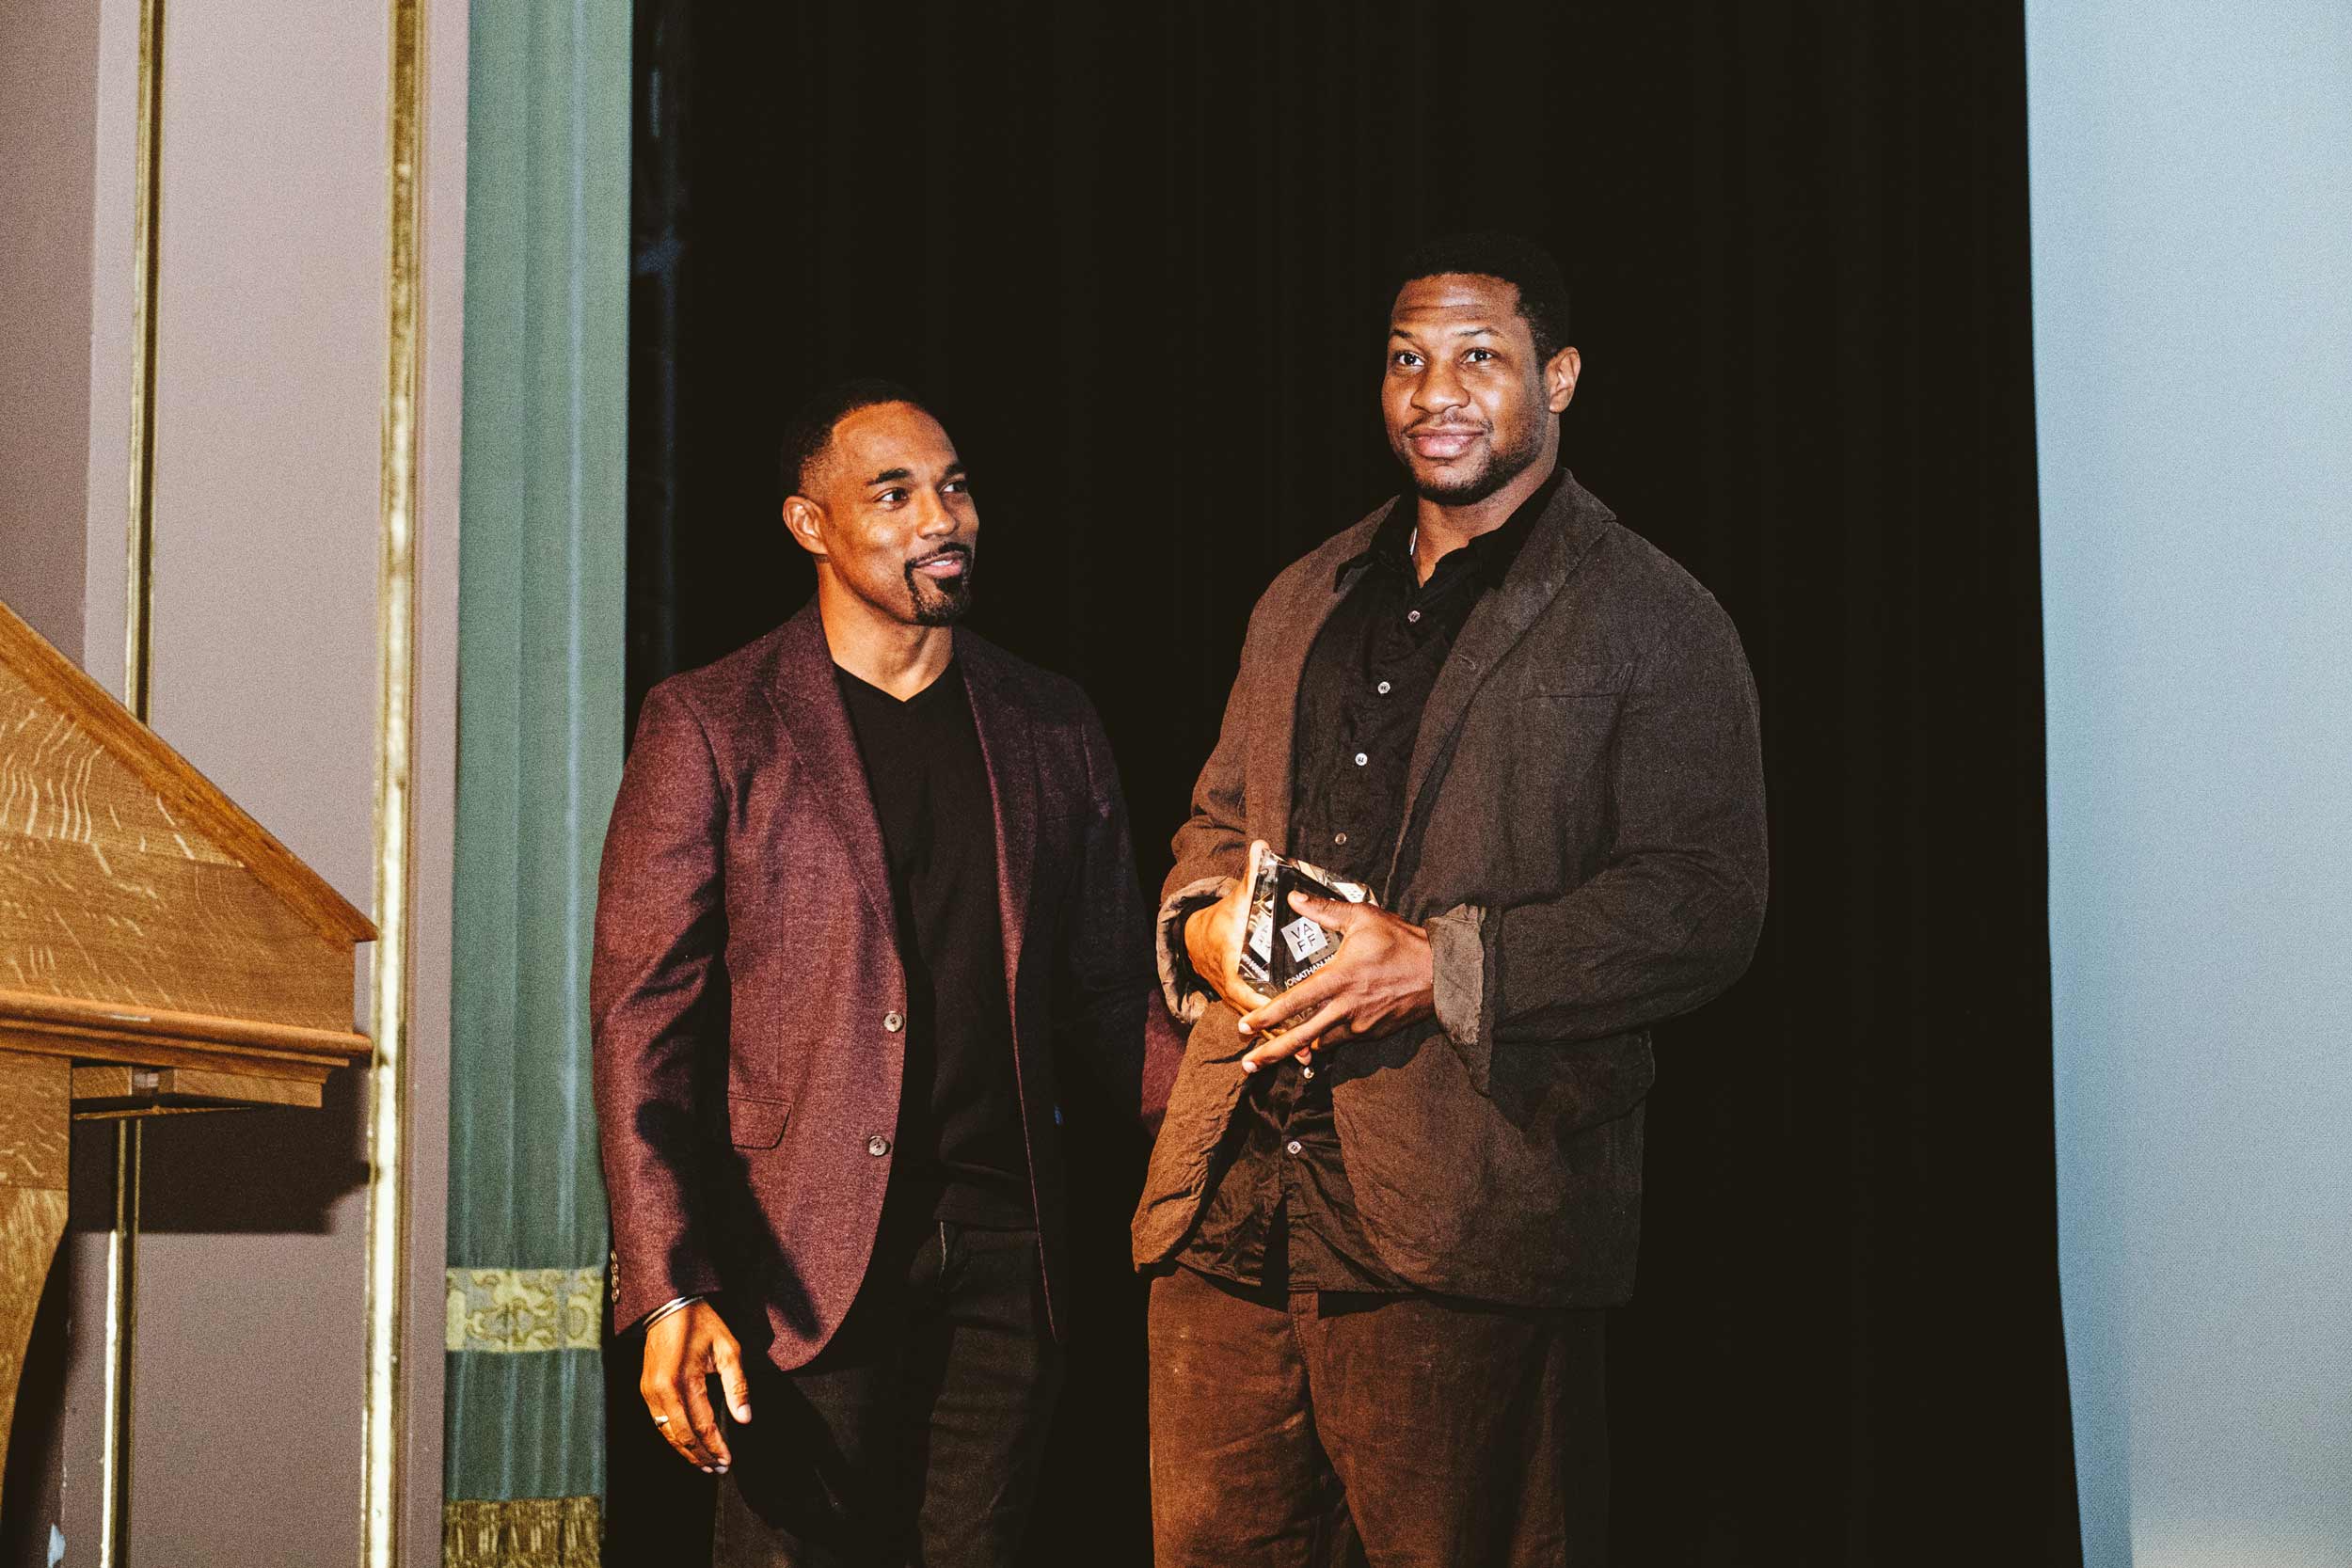 Two men standing on stage accepting an award